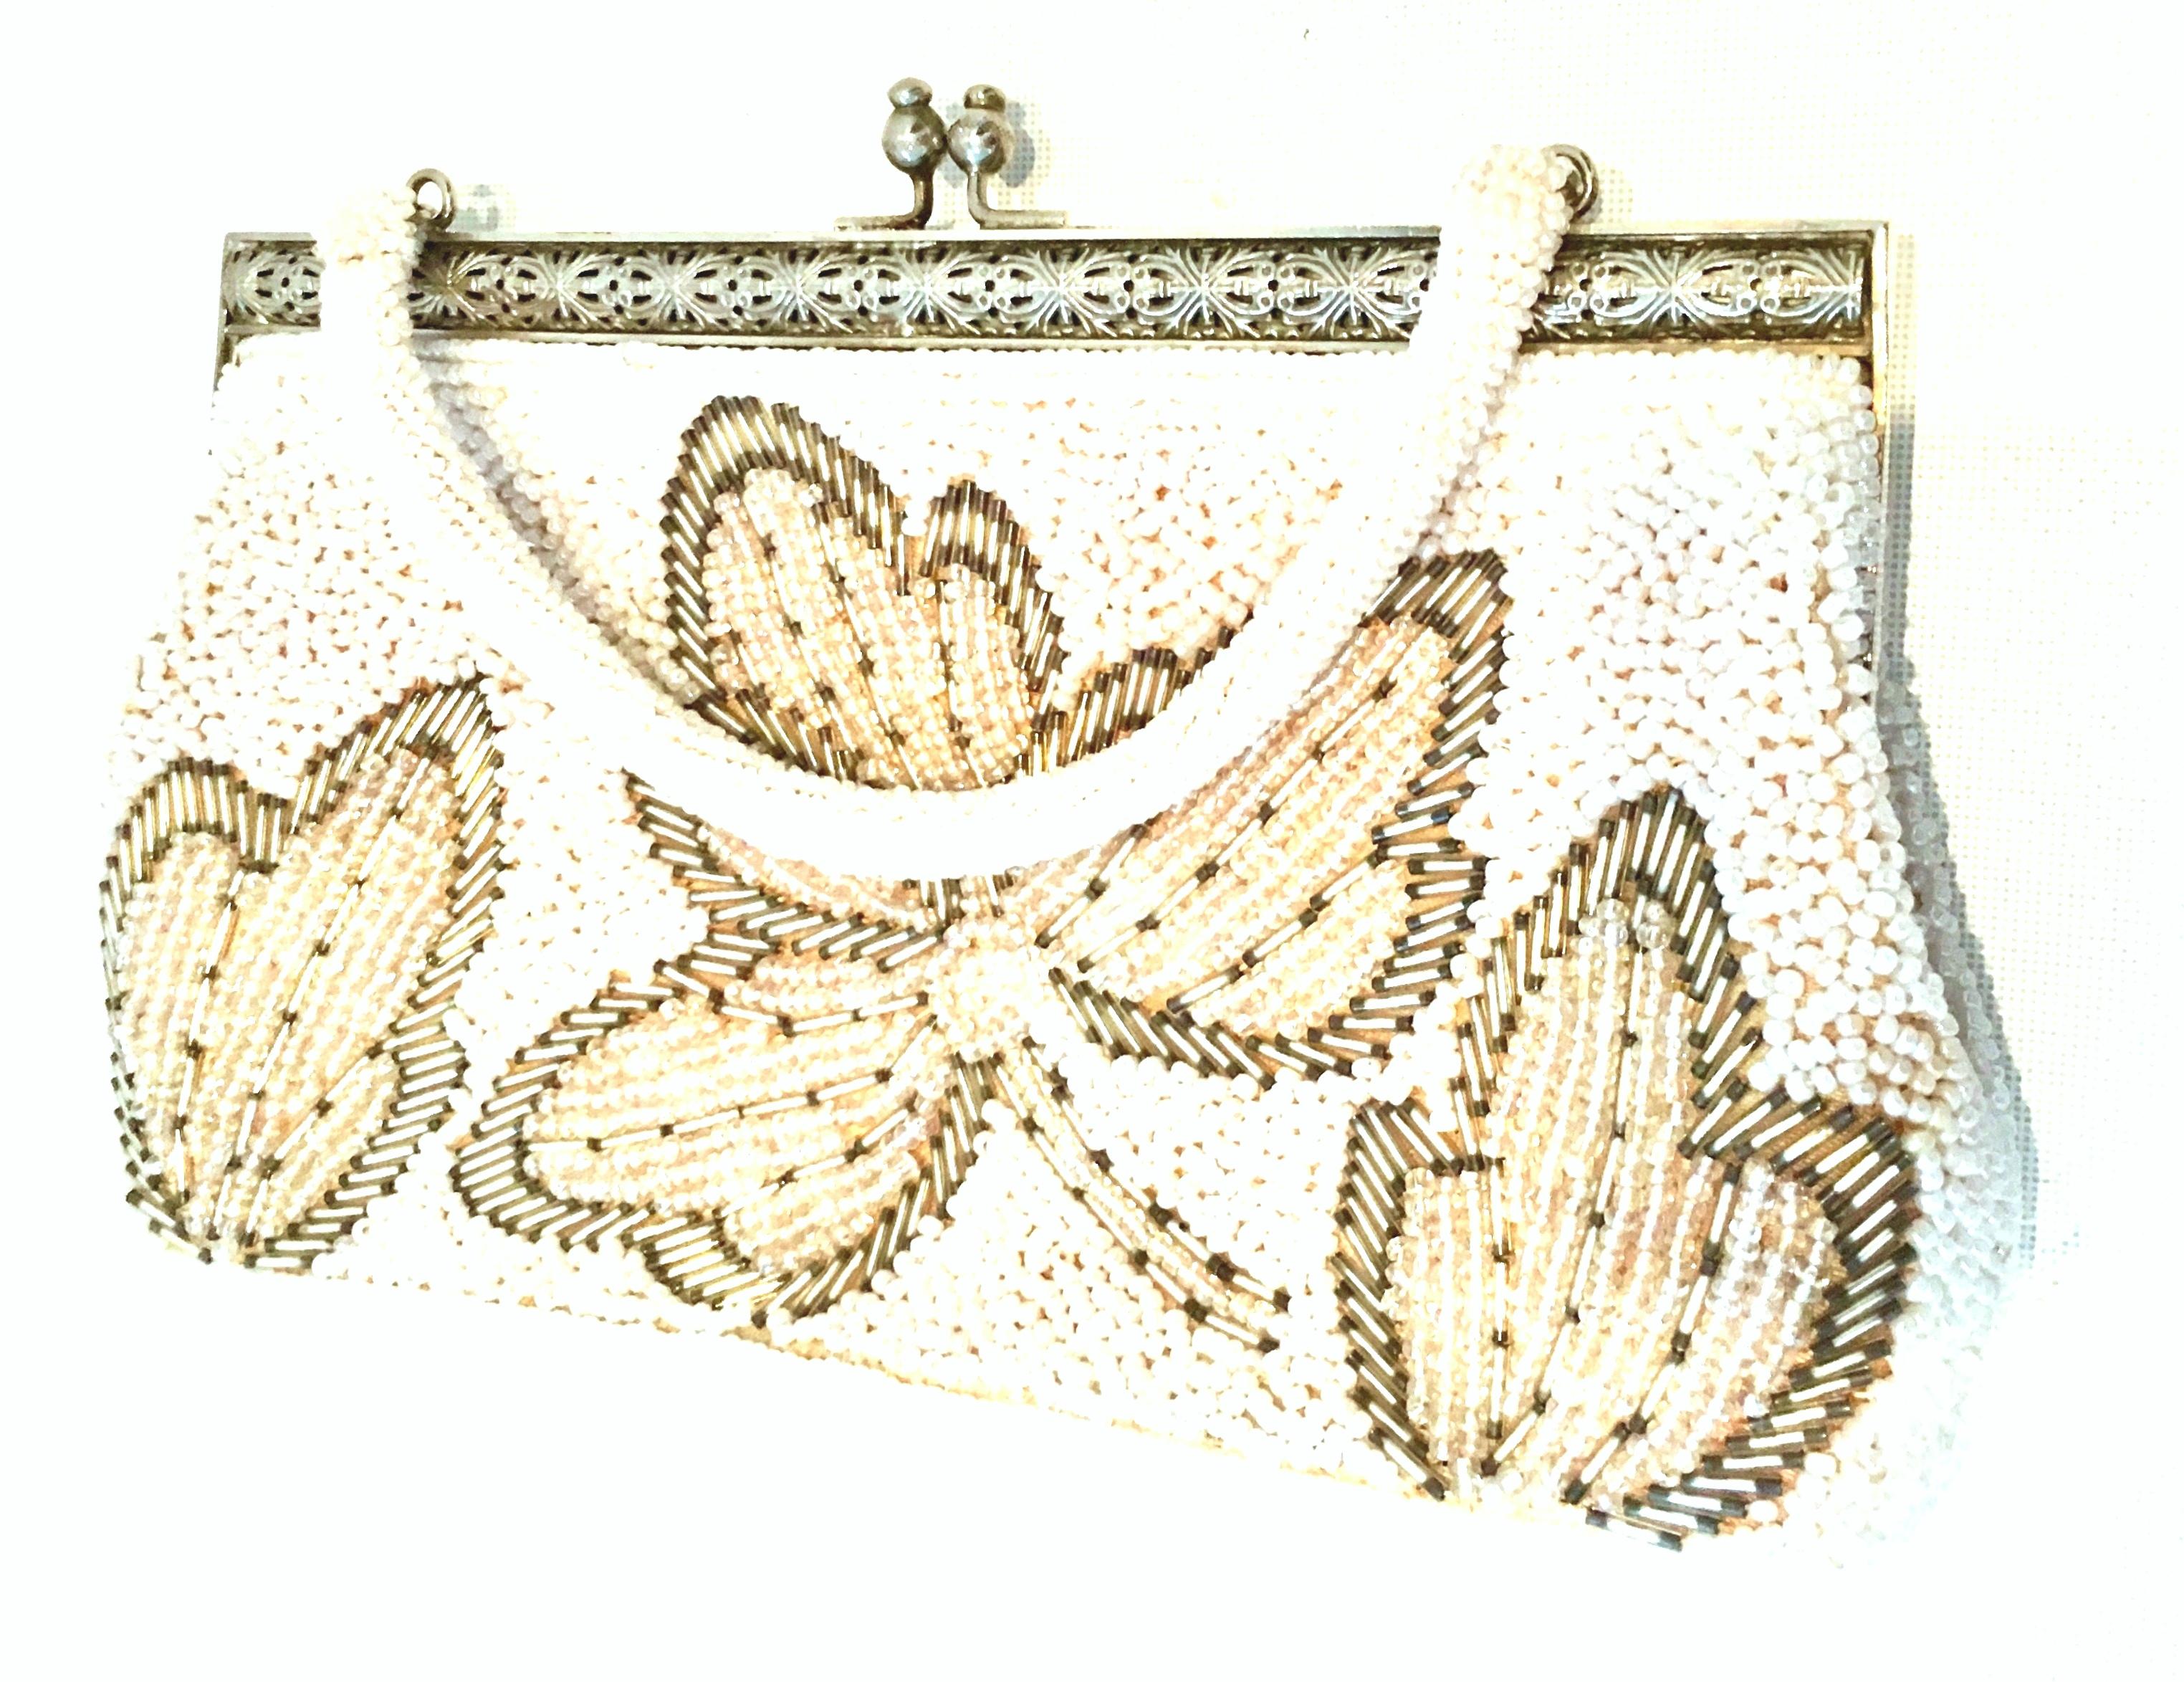 20th Century faux pearl & silver glass hand beaded Hong Kong evening bag. This rare floral motif Hong Kong bag features shimmering,  tiny pearl ascent white beads with iridescent faux pearl beads and silver glss beads in a raised floral double sided